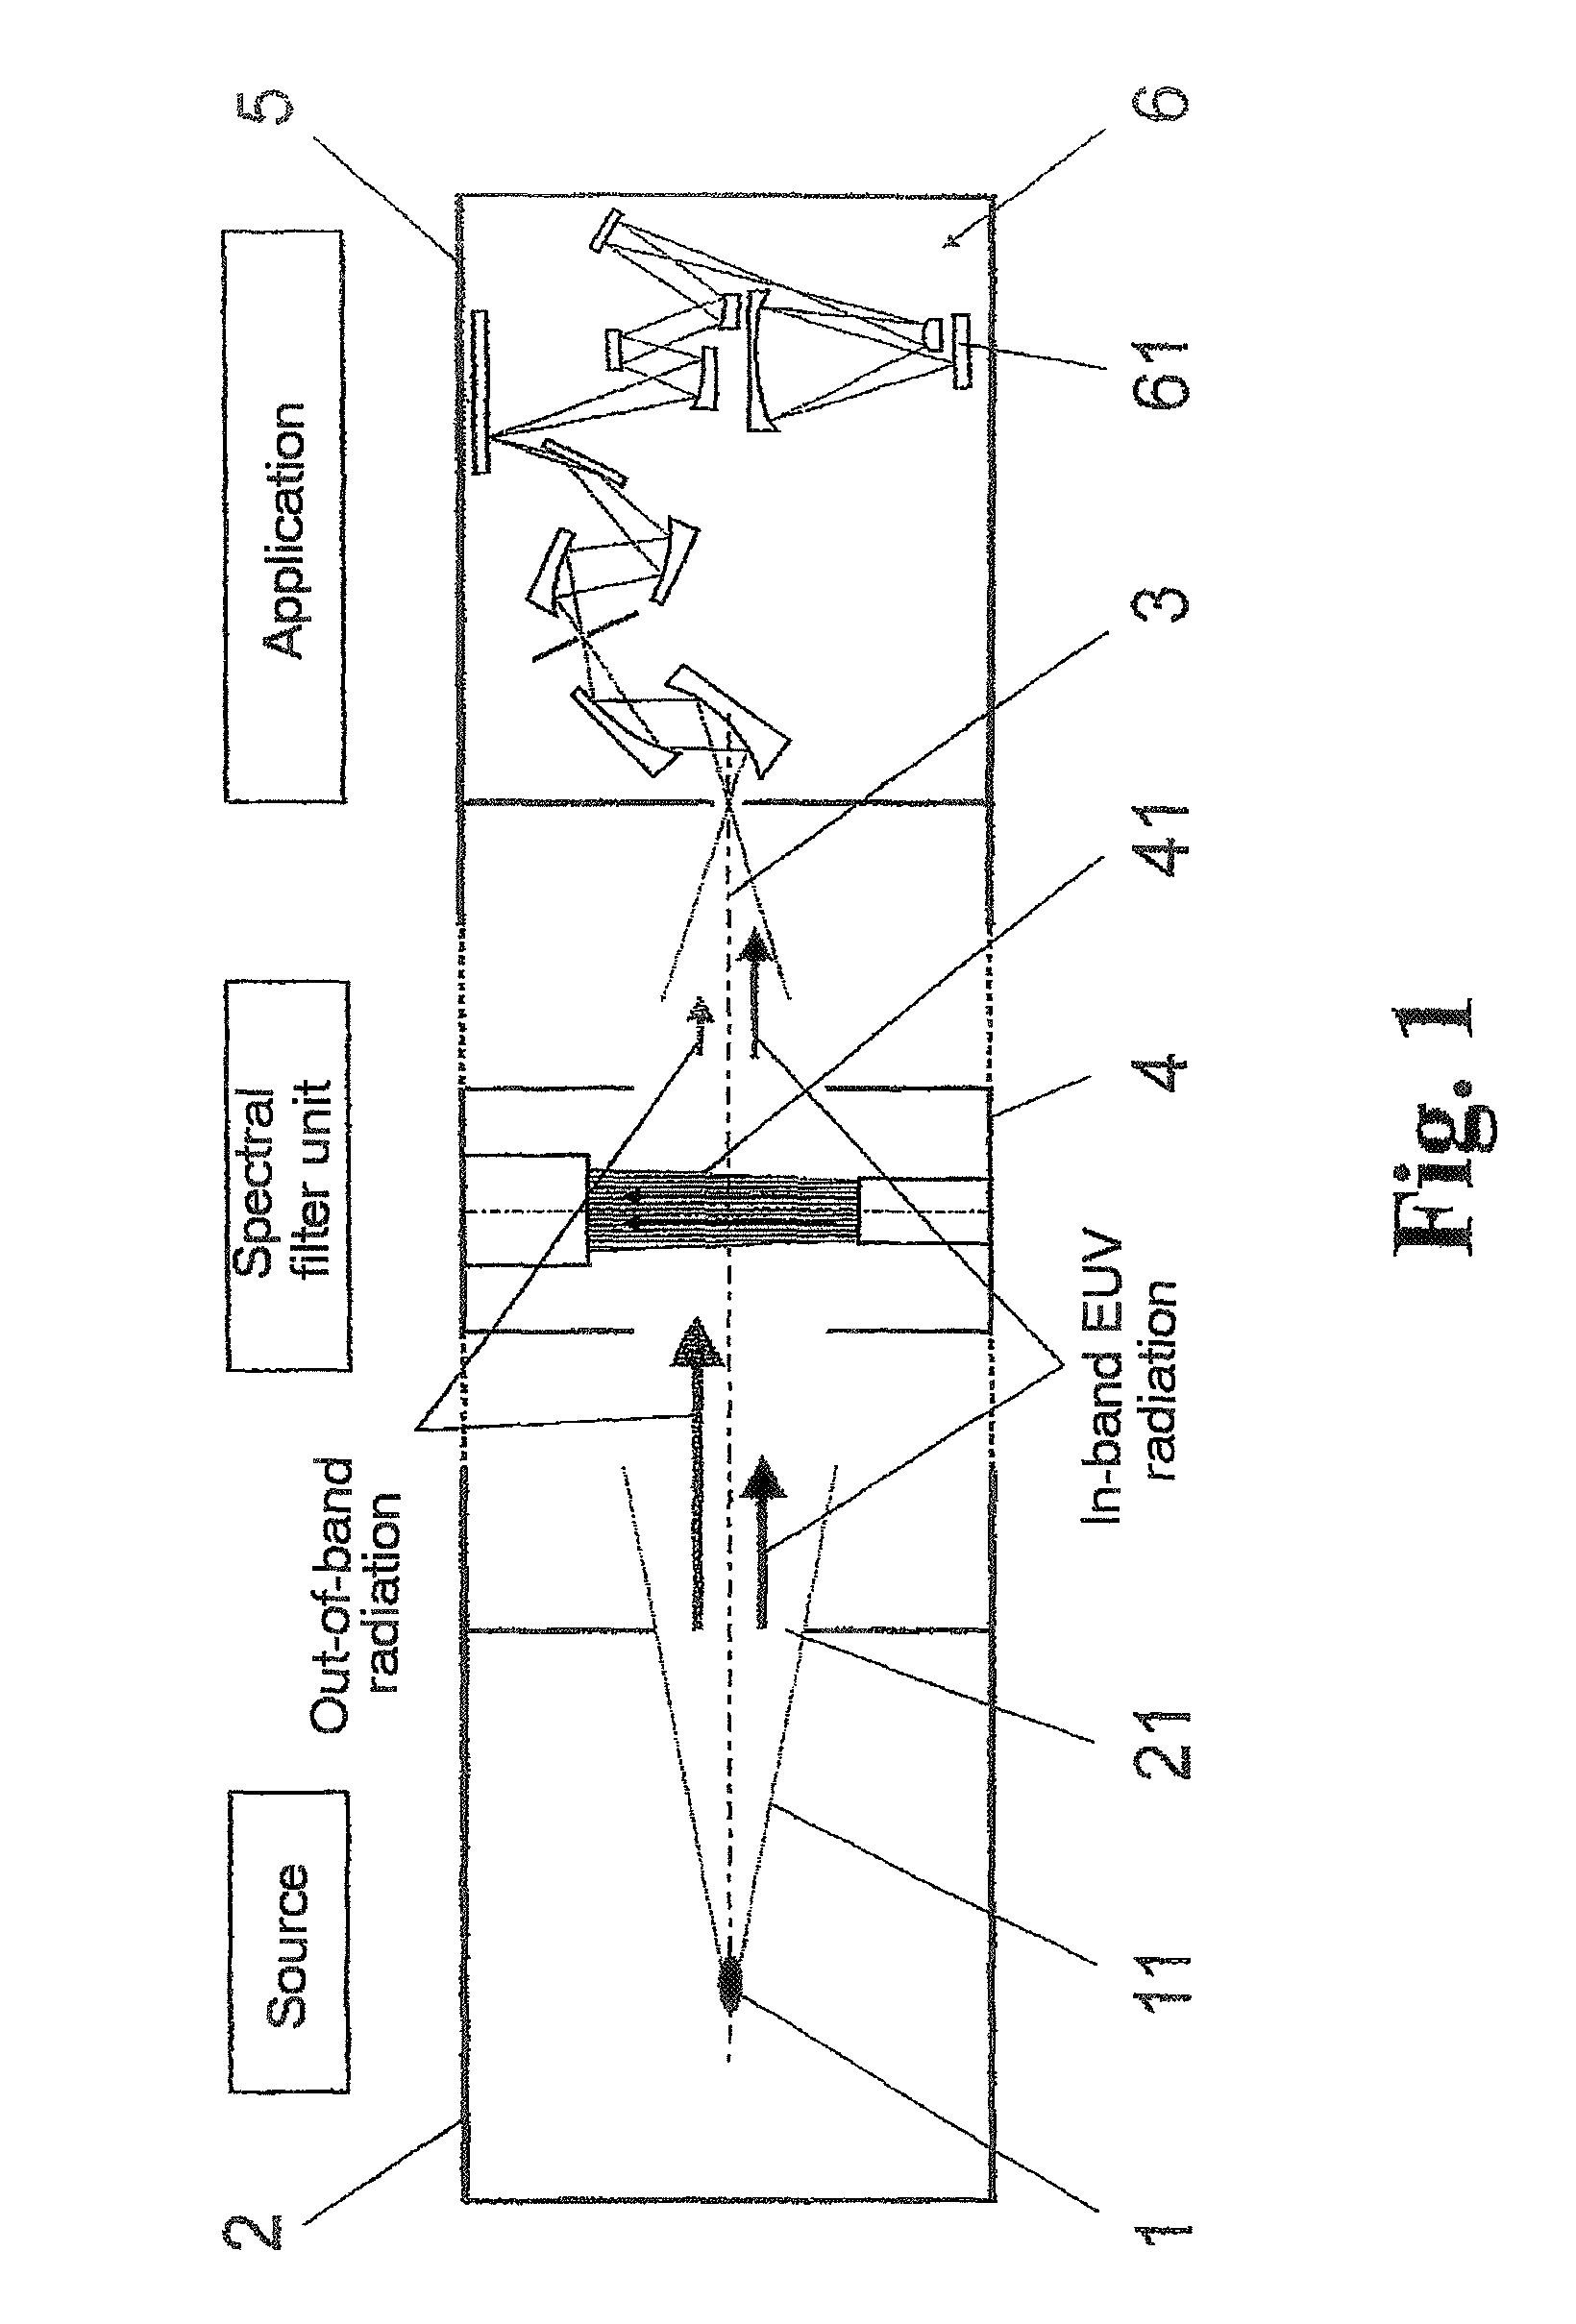 Arrangement for the suppression of unwanted spectral components in a plasma-based EUV radiation source